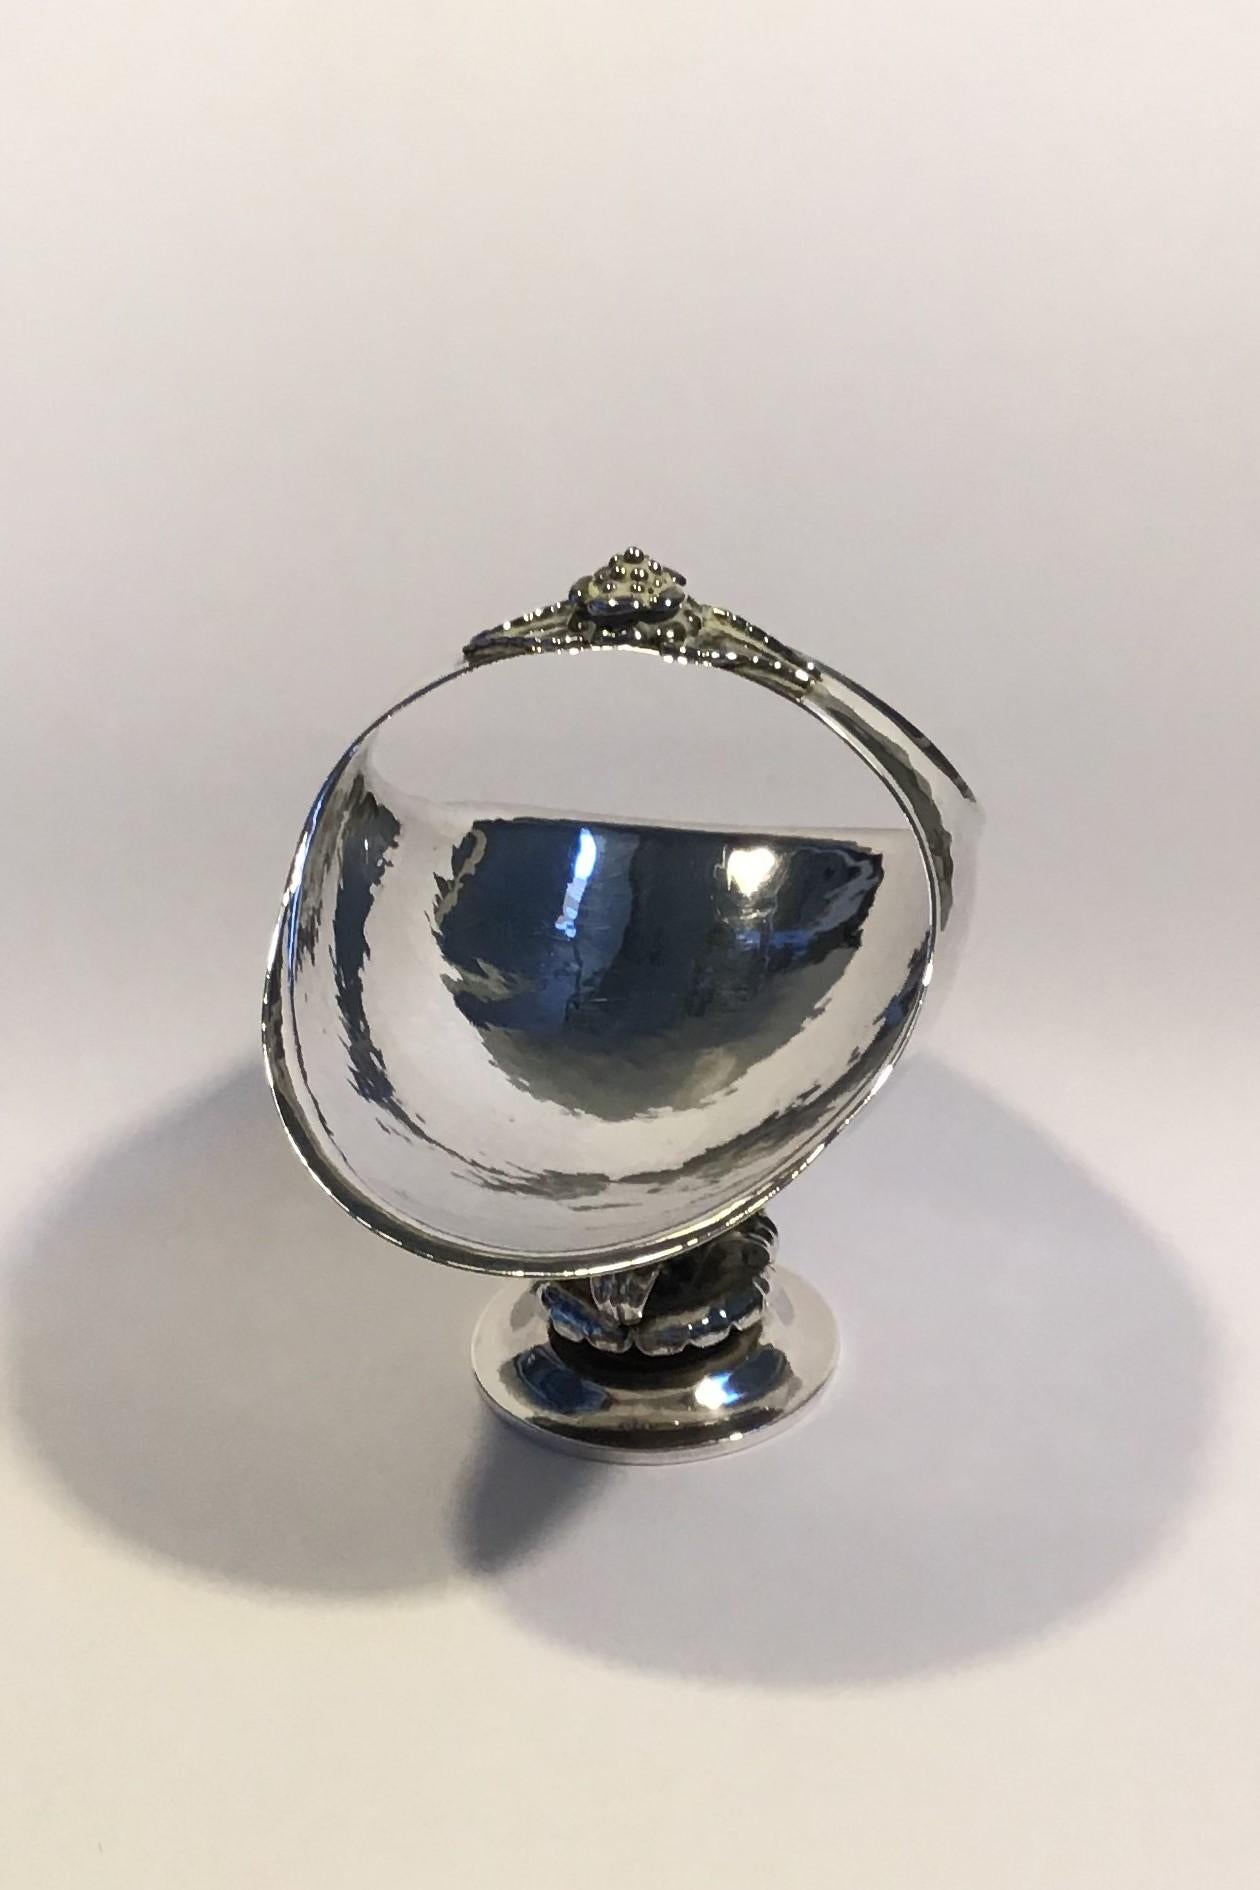 Georg Jensen sterling silver candy basket no 238 (1915-1927).

Measures: H 10 cm (4 in) 10.5 cm x 7.5 cm (4 9/64 in x 2 61/64 in)
Weight 113.7 gr/4 oz.